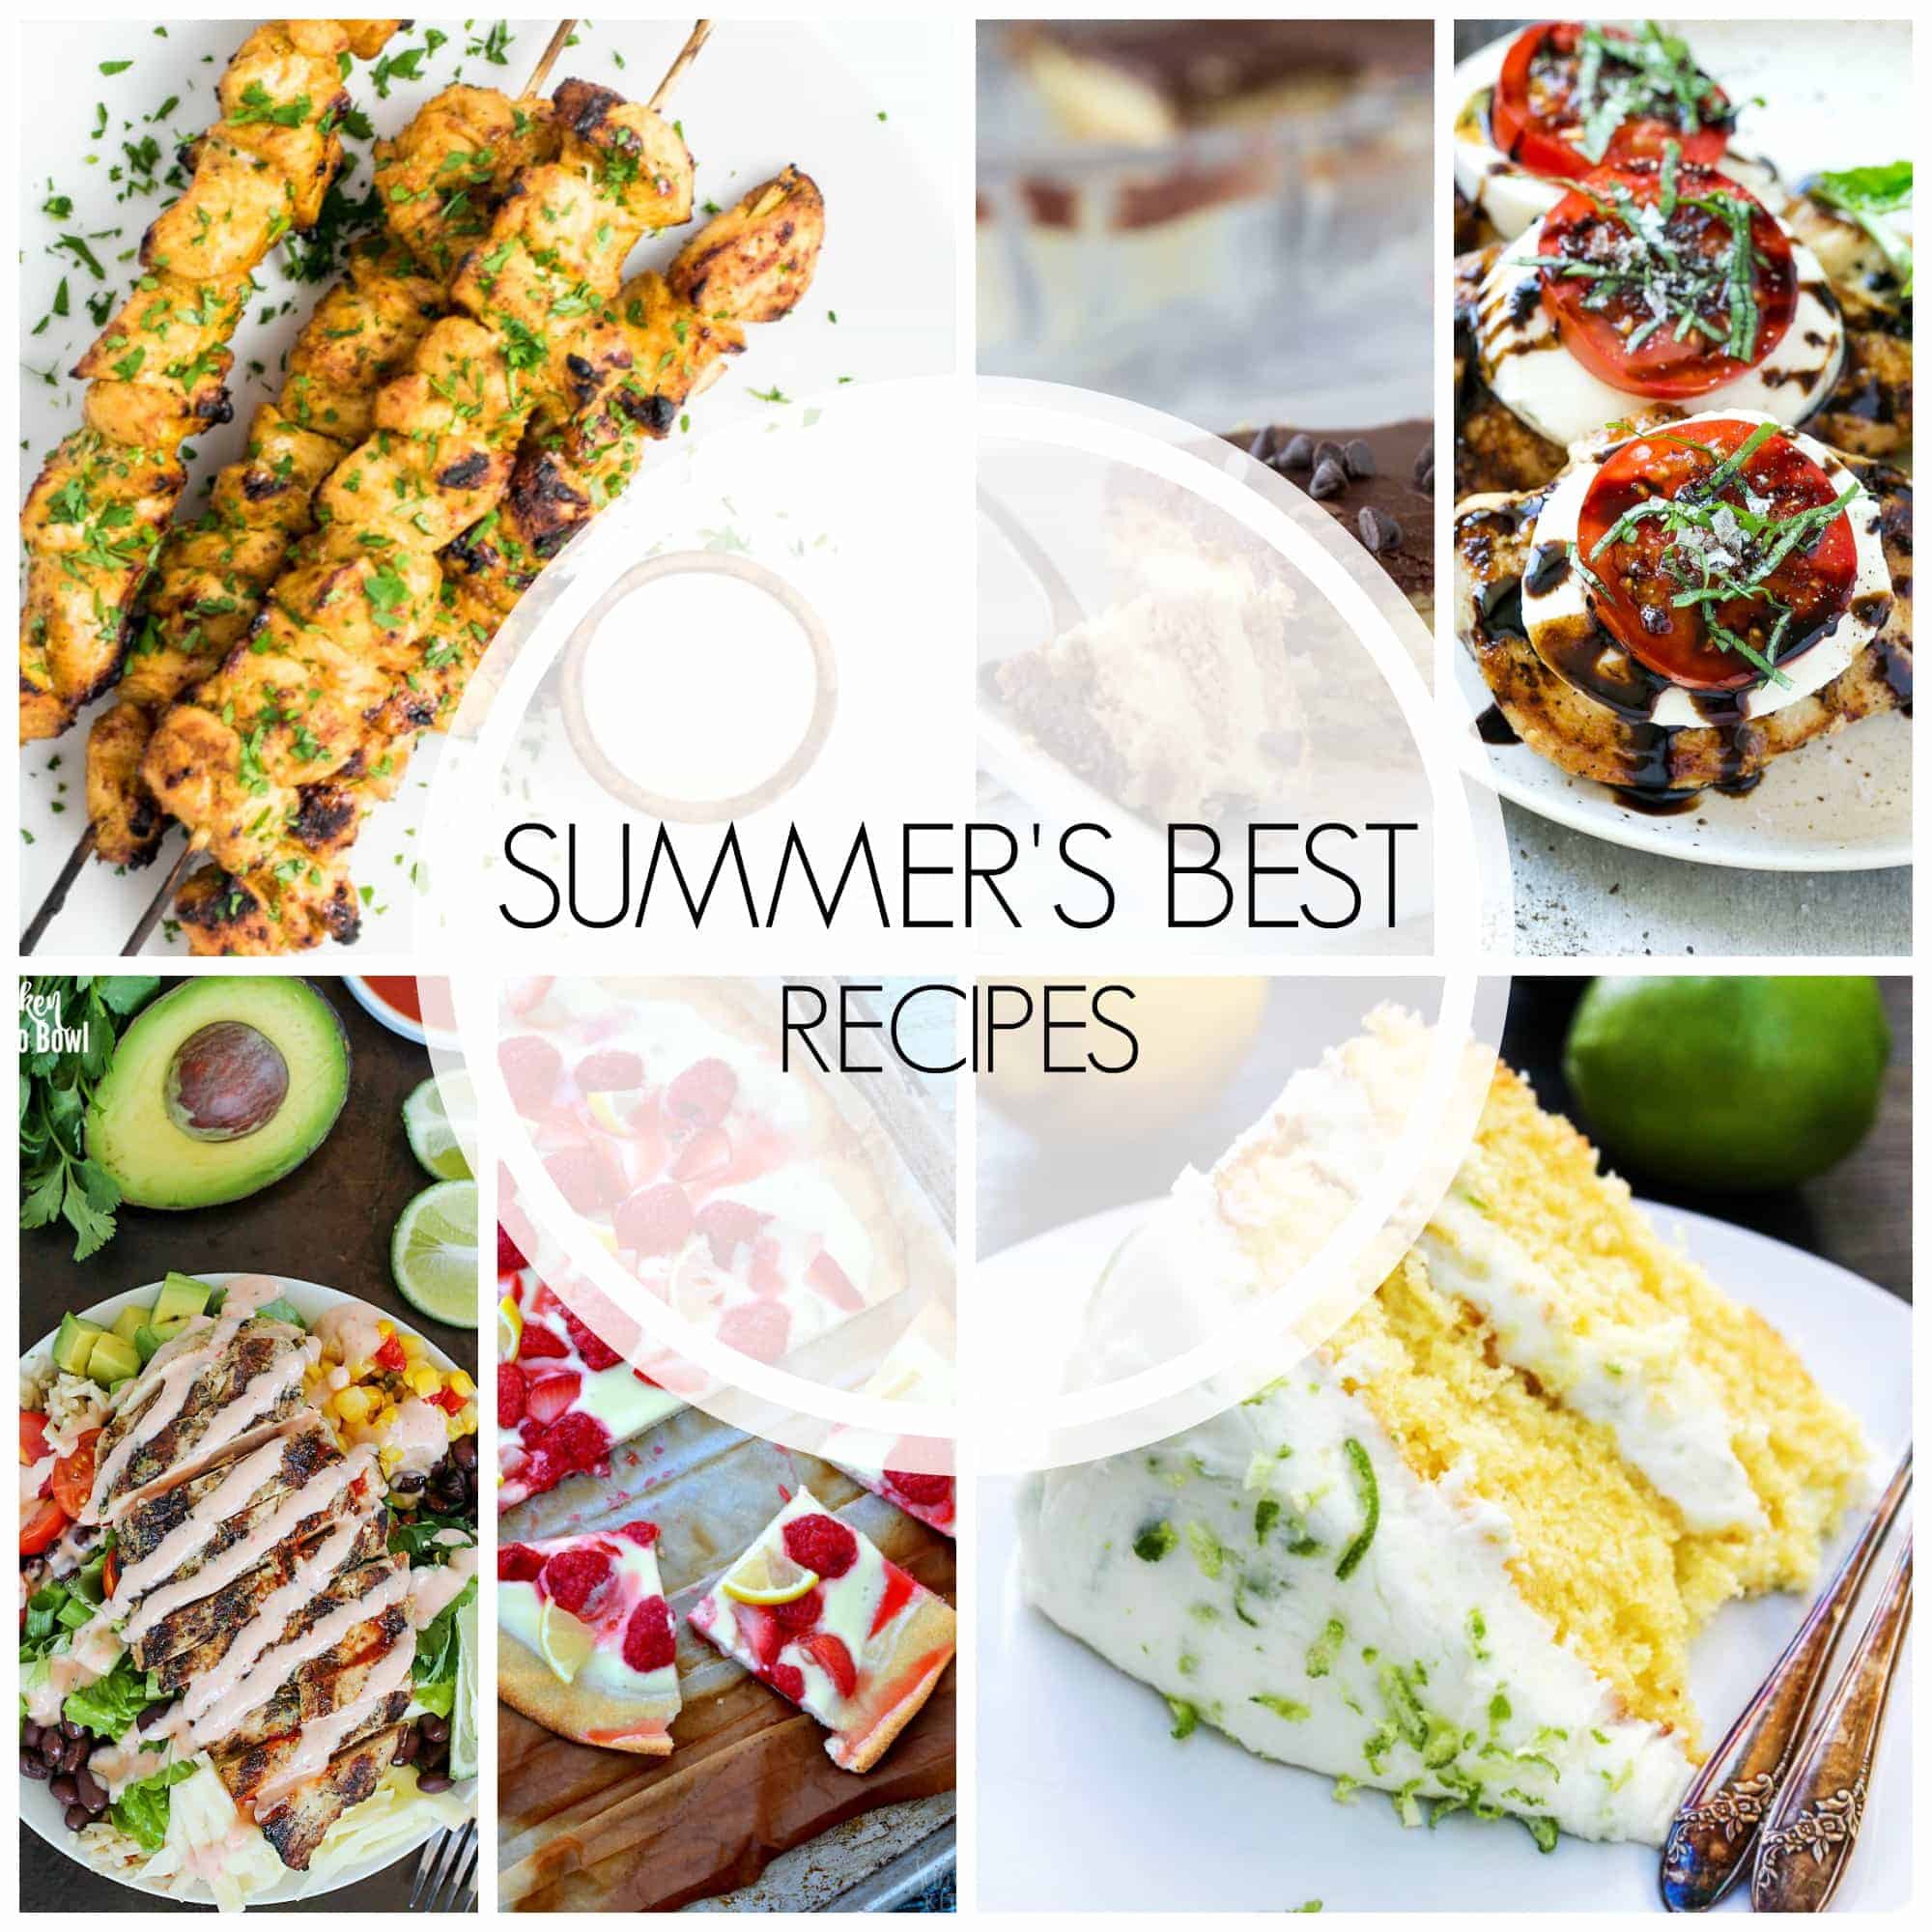 Even though summer may be over, it doesn't mean that you can't continue to enjoy summer's best recipes from some of your favorite bloggers.